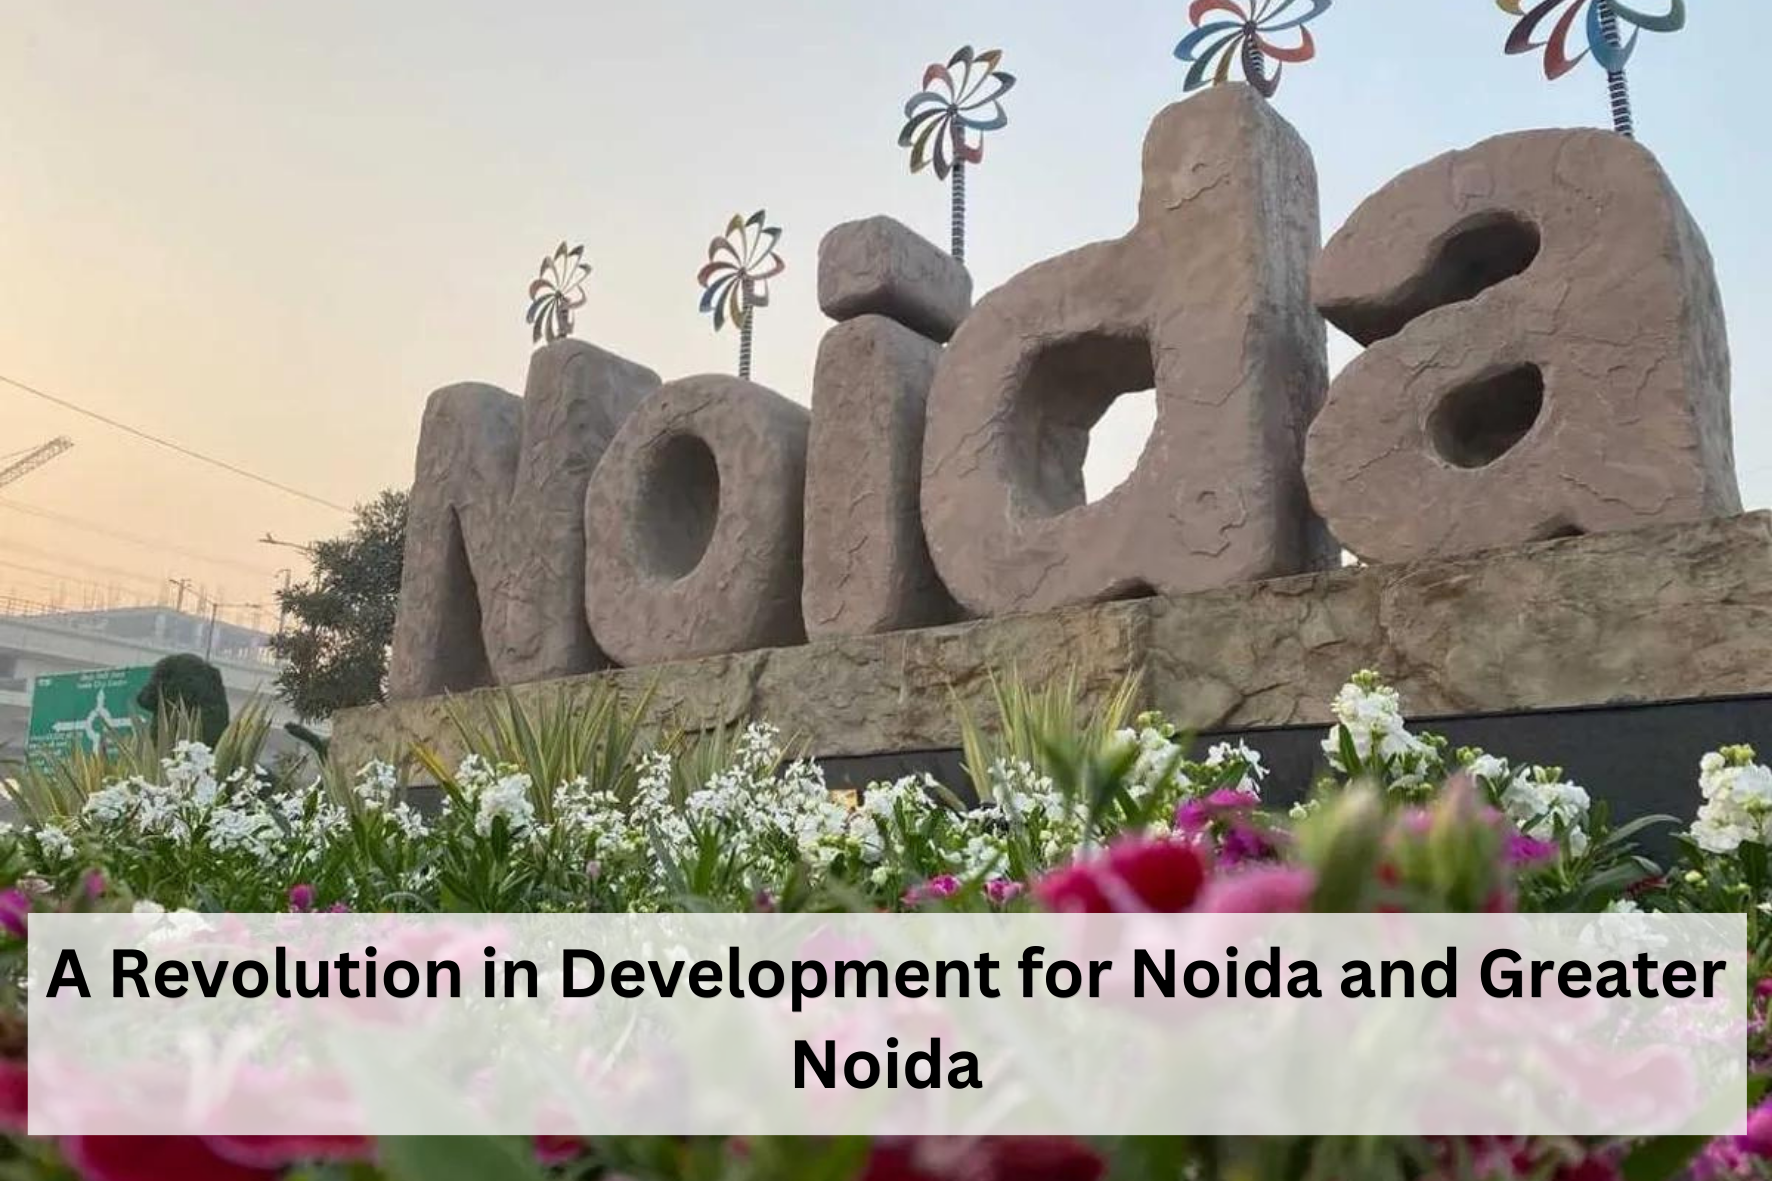 uploads/blog/Add_a_subhA_Revolution_in_Development_for_Noida_and_Greater_Noidaeading.png